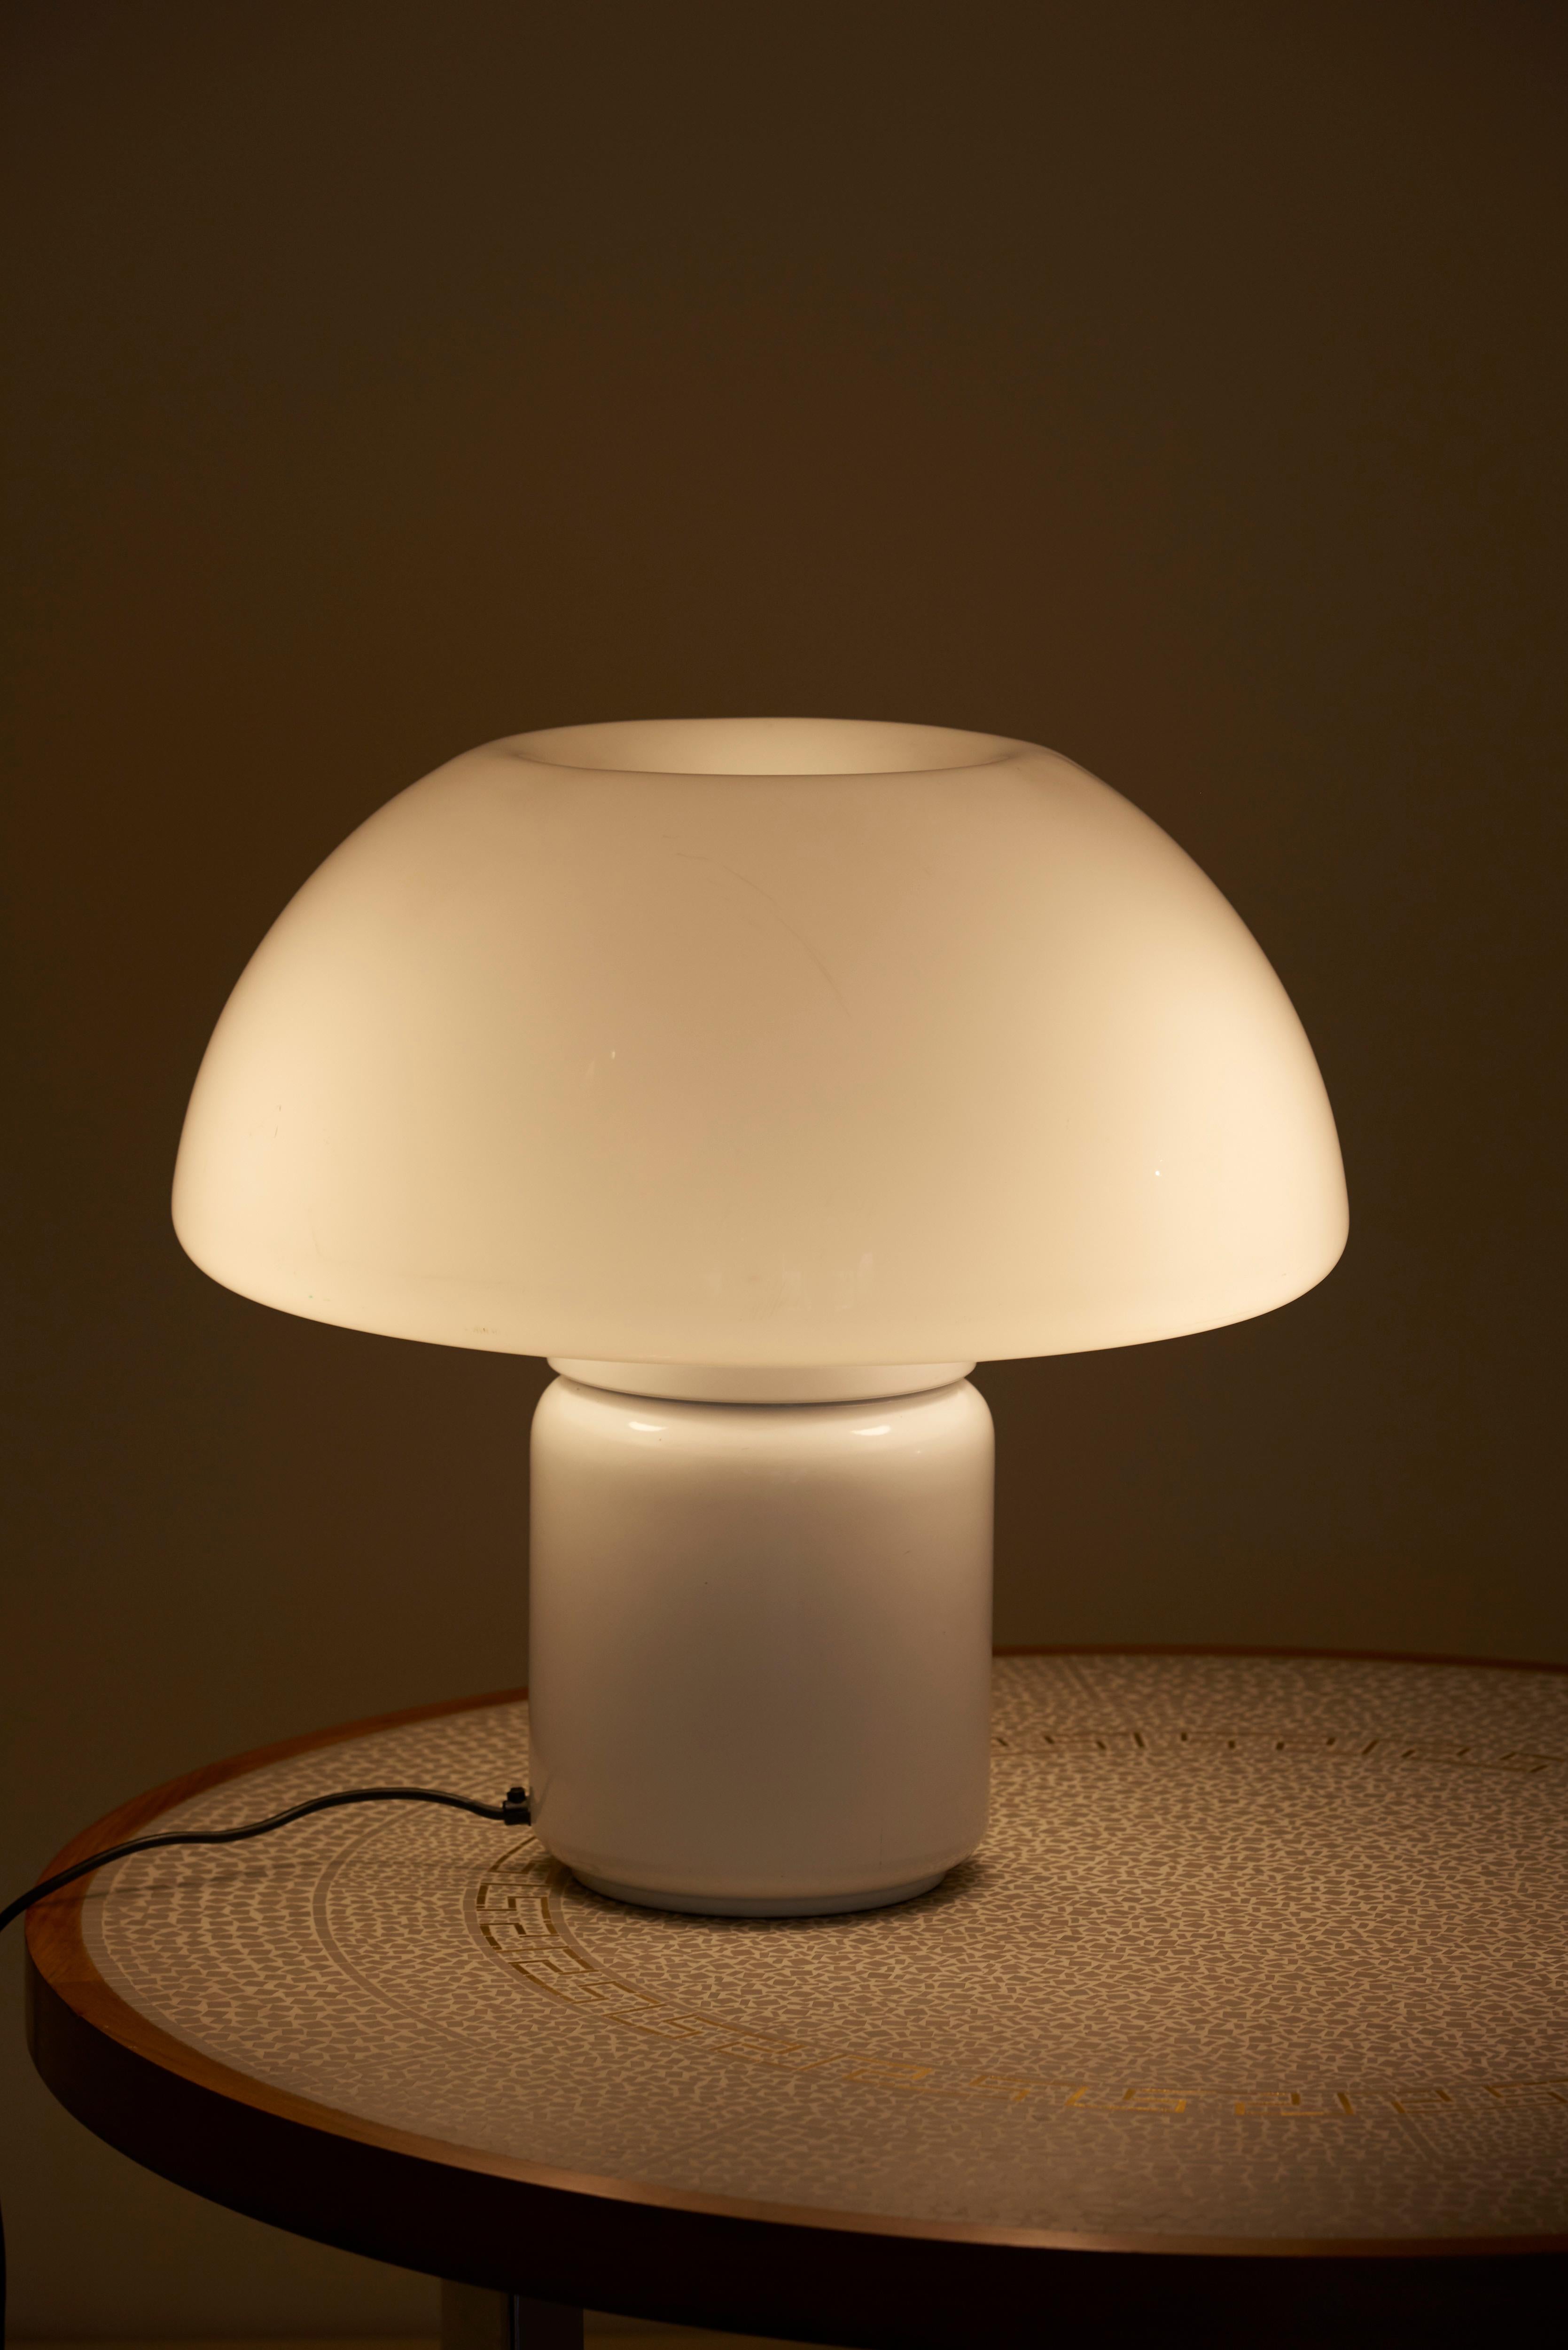 Space Age Mushroom Table Lamp Mod. 625 by Elio Martinelli for Martinelli Luce, Italy